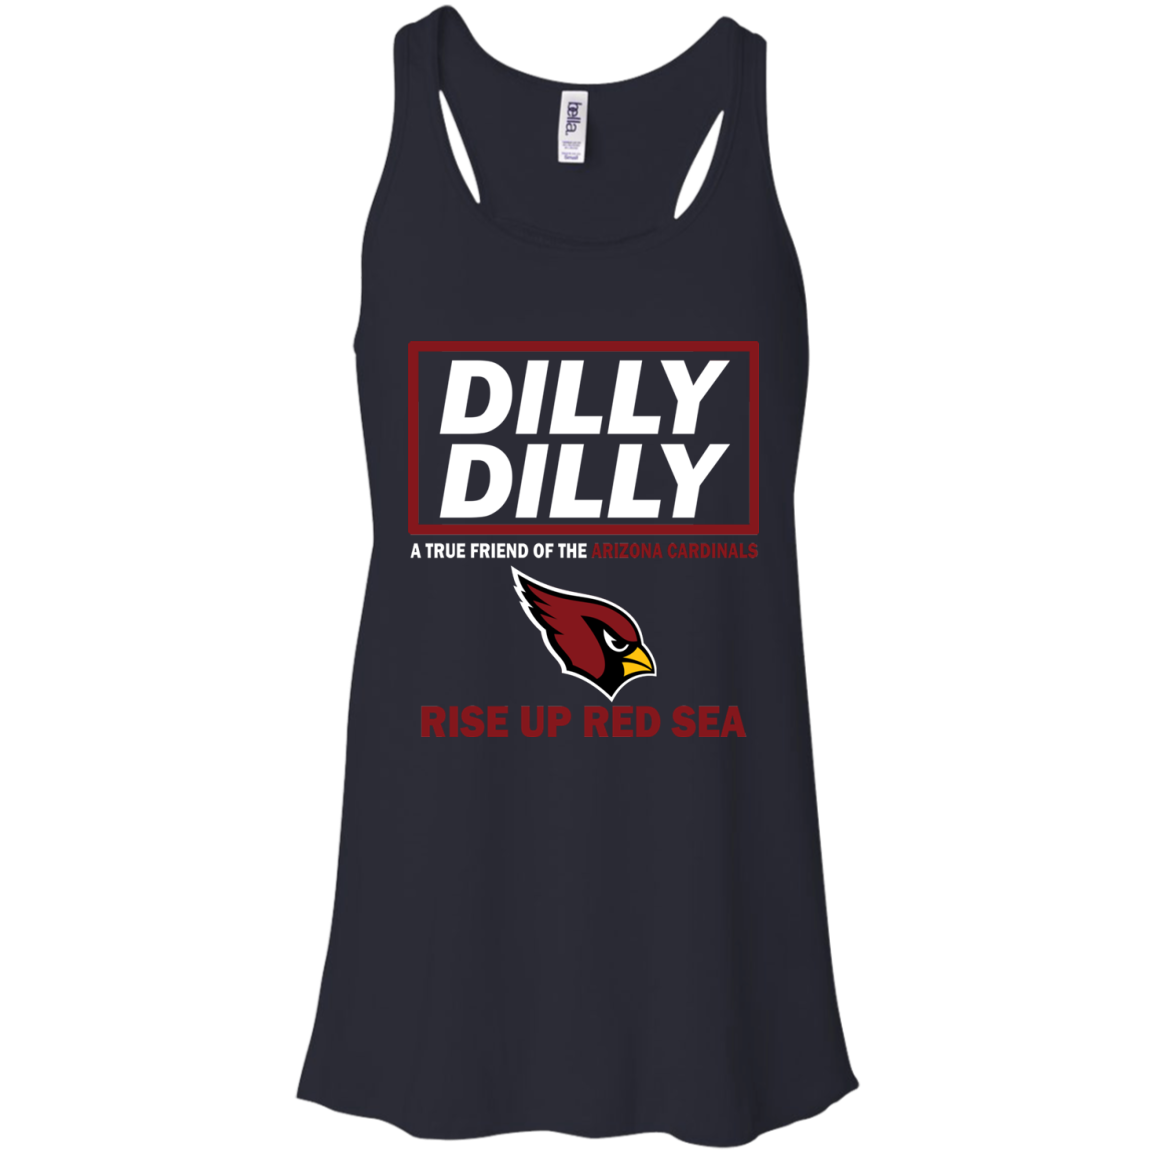 Dilly Dilly A True Friend Of The Arizona Cardinals Rise Up Red Sea Flowy Racerback Tank T 